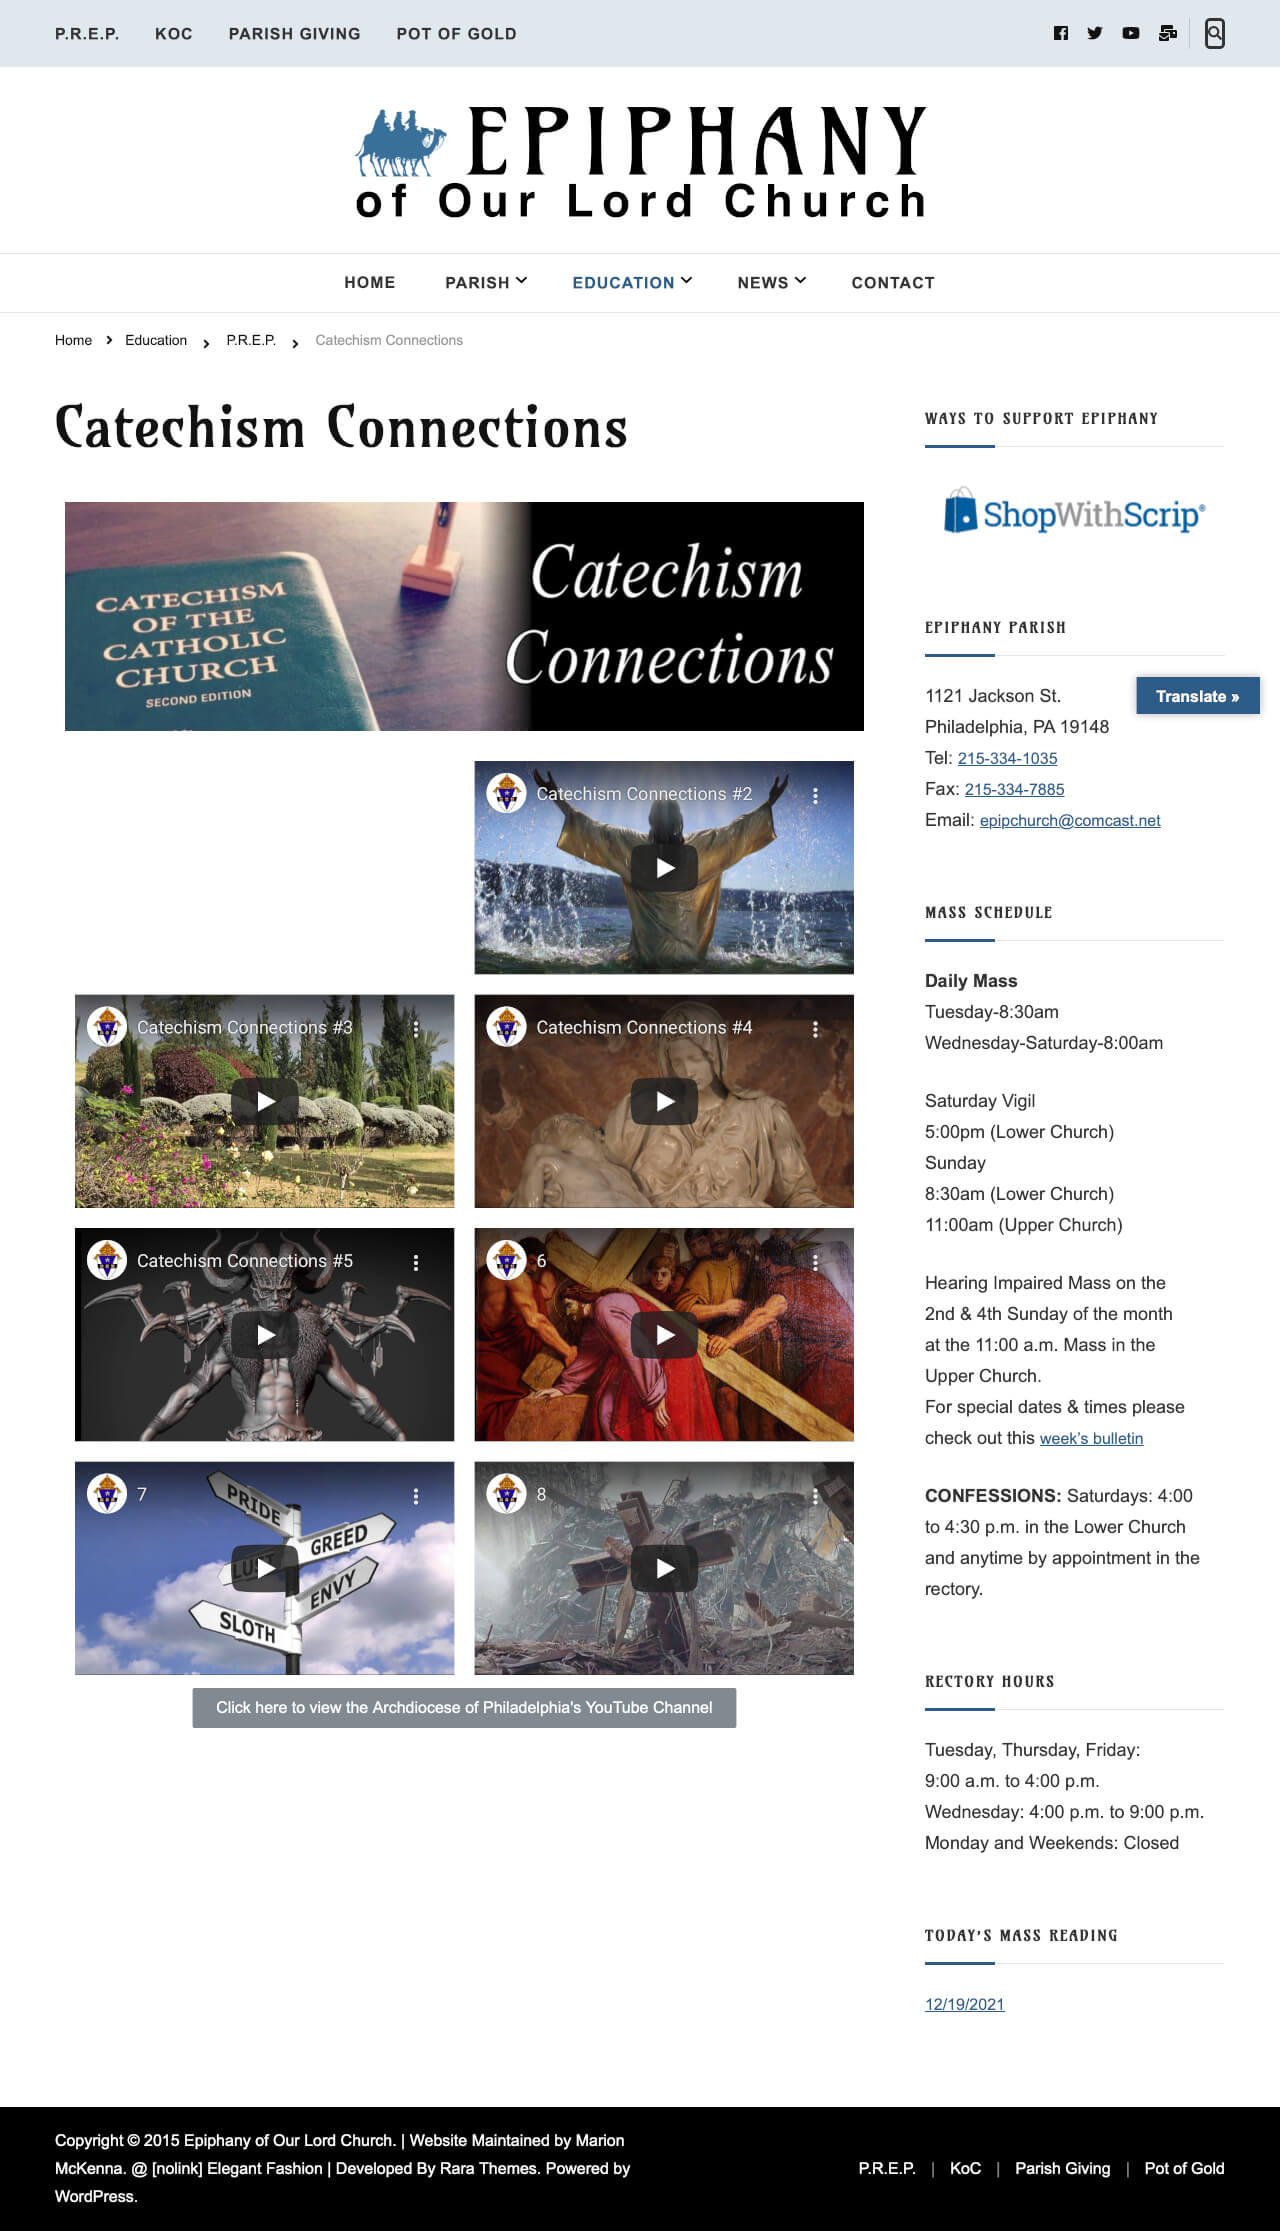 Catechism Connections